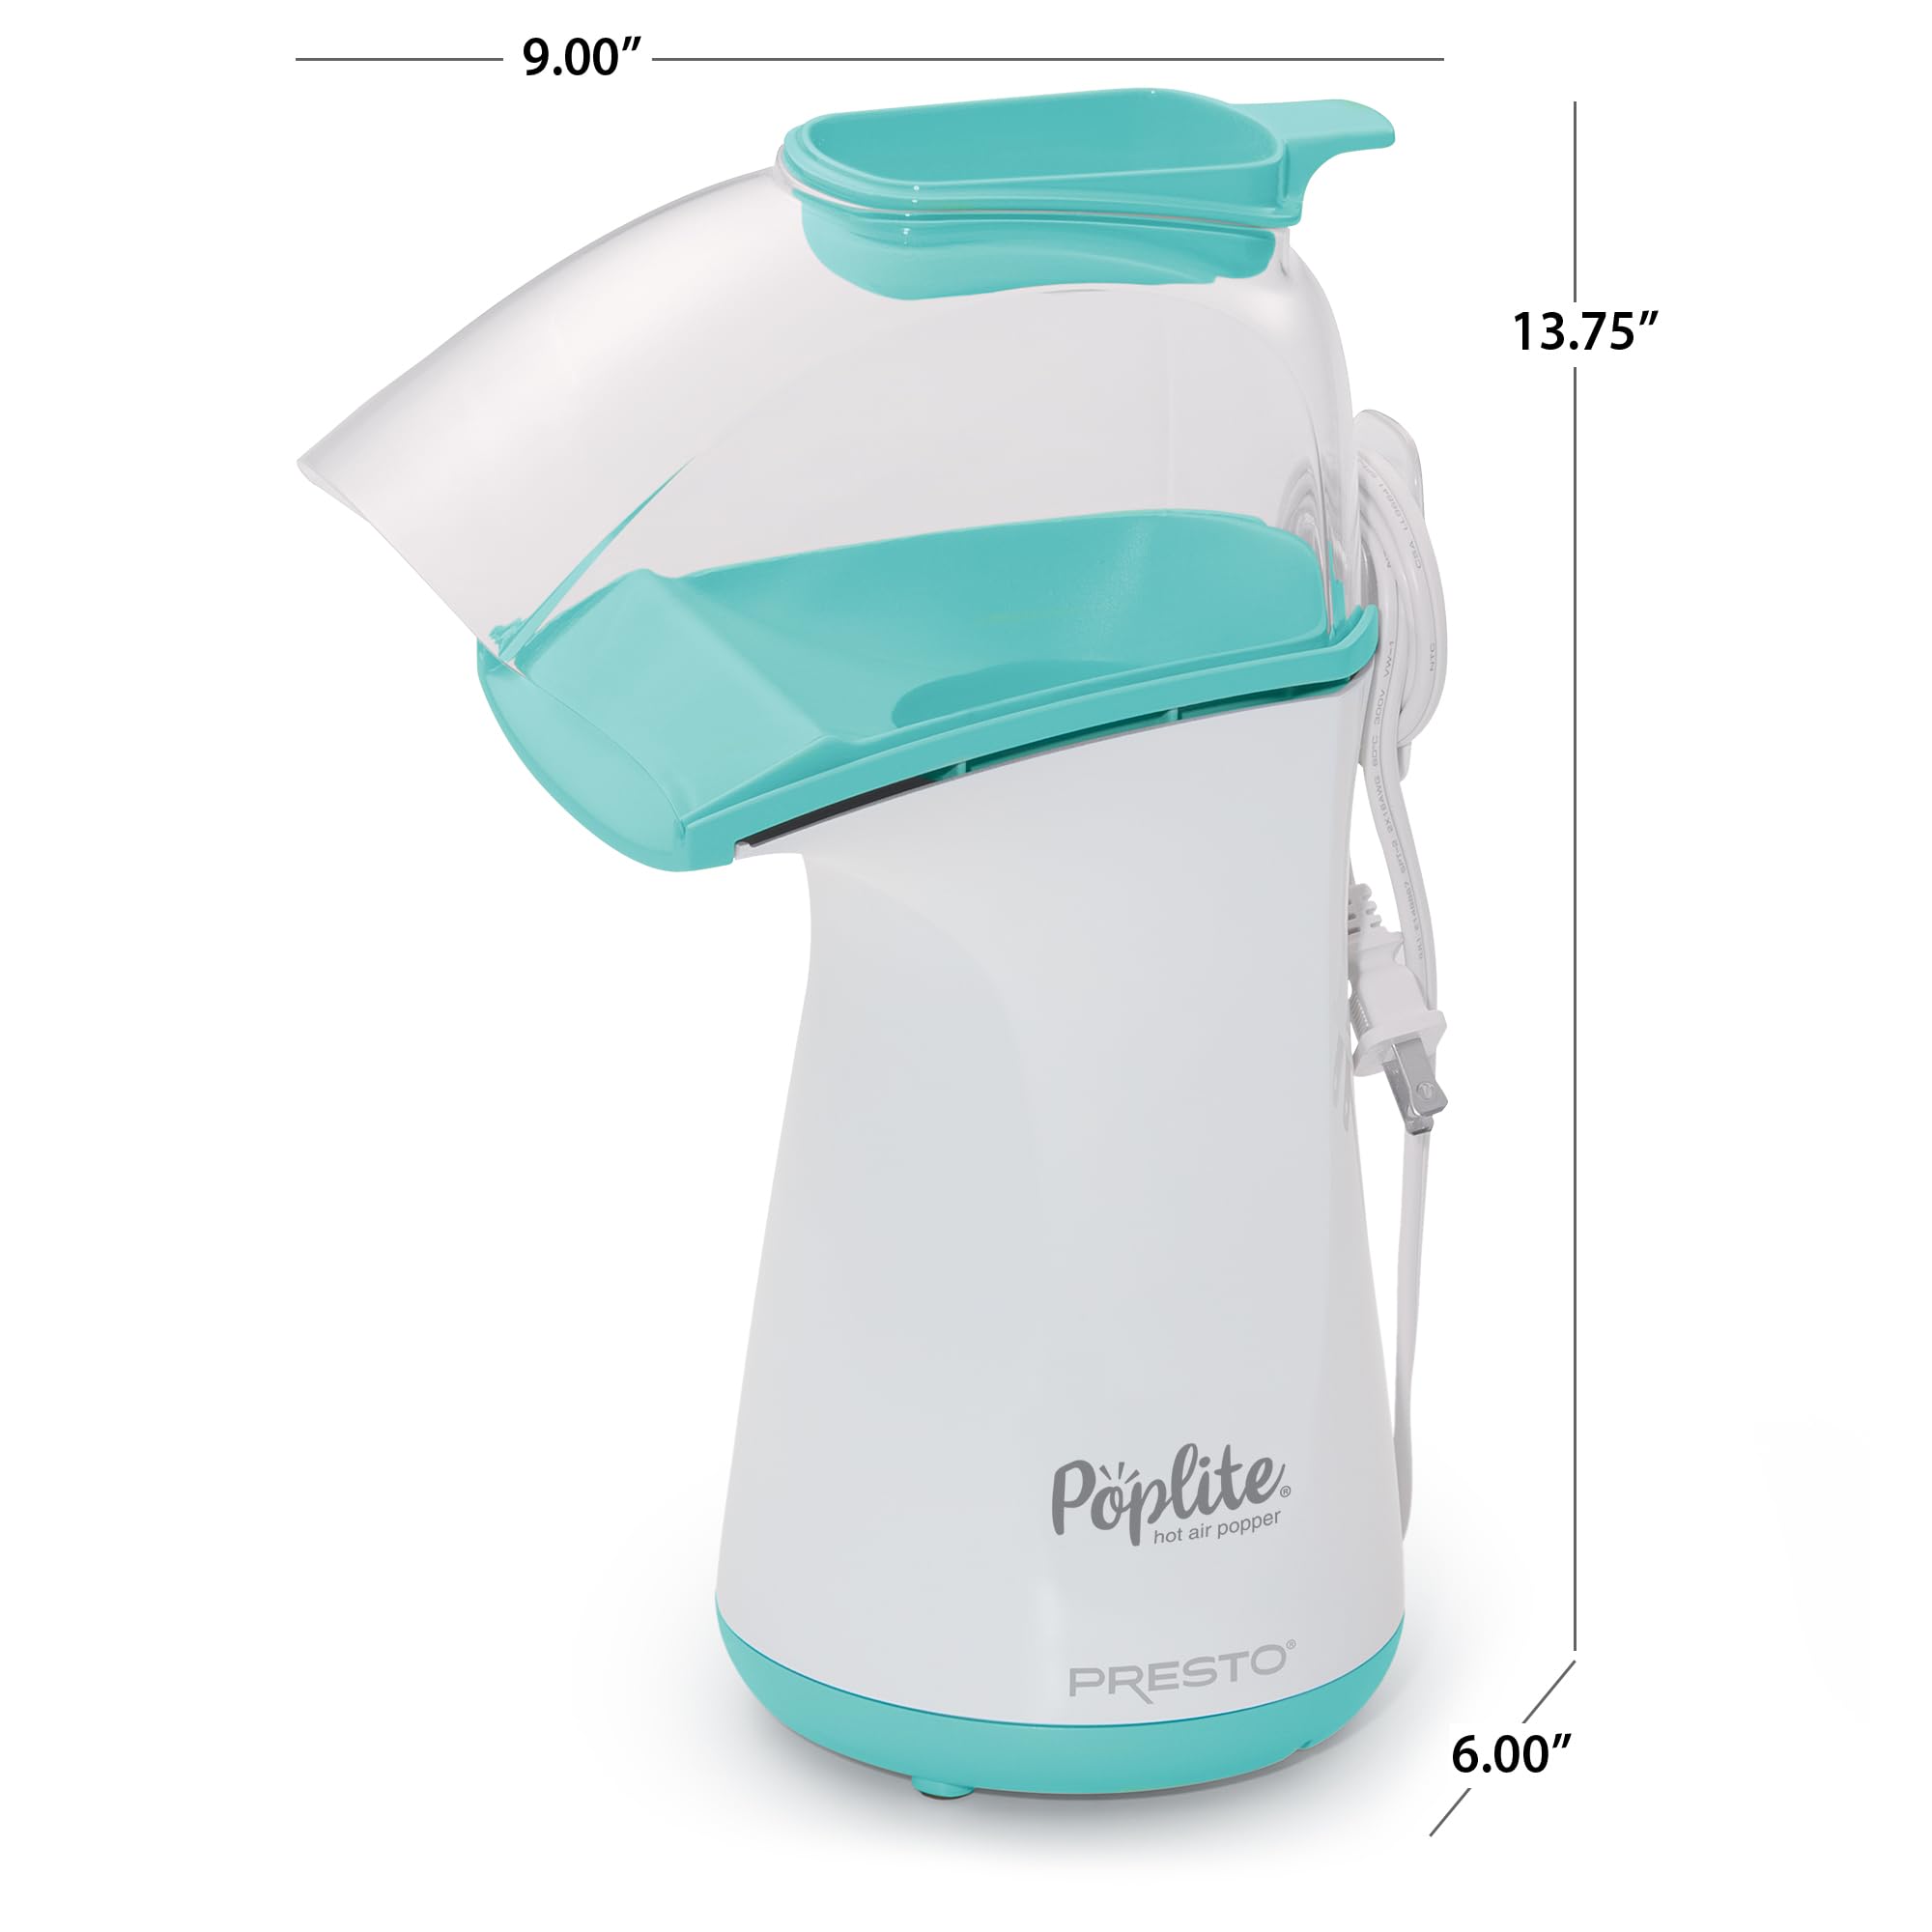 Presto 04869 PopLite Hot Air Popper - Built-In Measuring Cup + Melts Butter, Easy to Clean, Built-In Cord Wrap, 18 Cups, Aqua/White